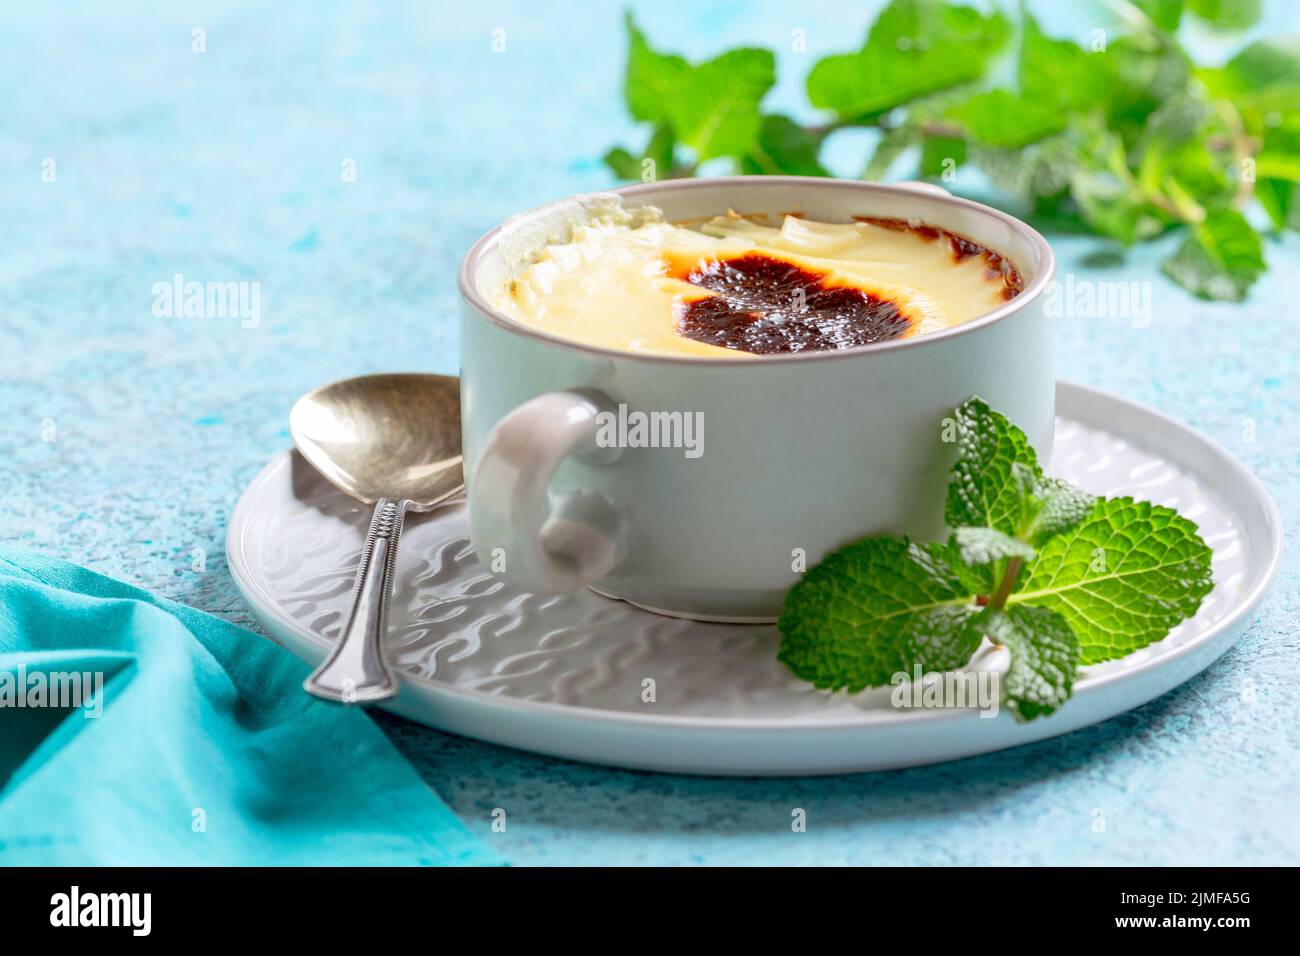 Delicious baked rice pudding. Stock Photo